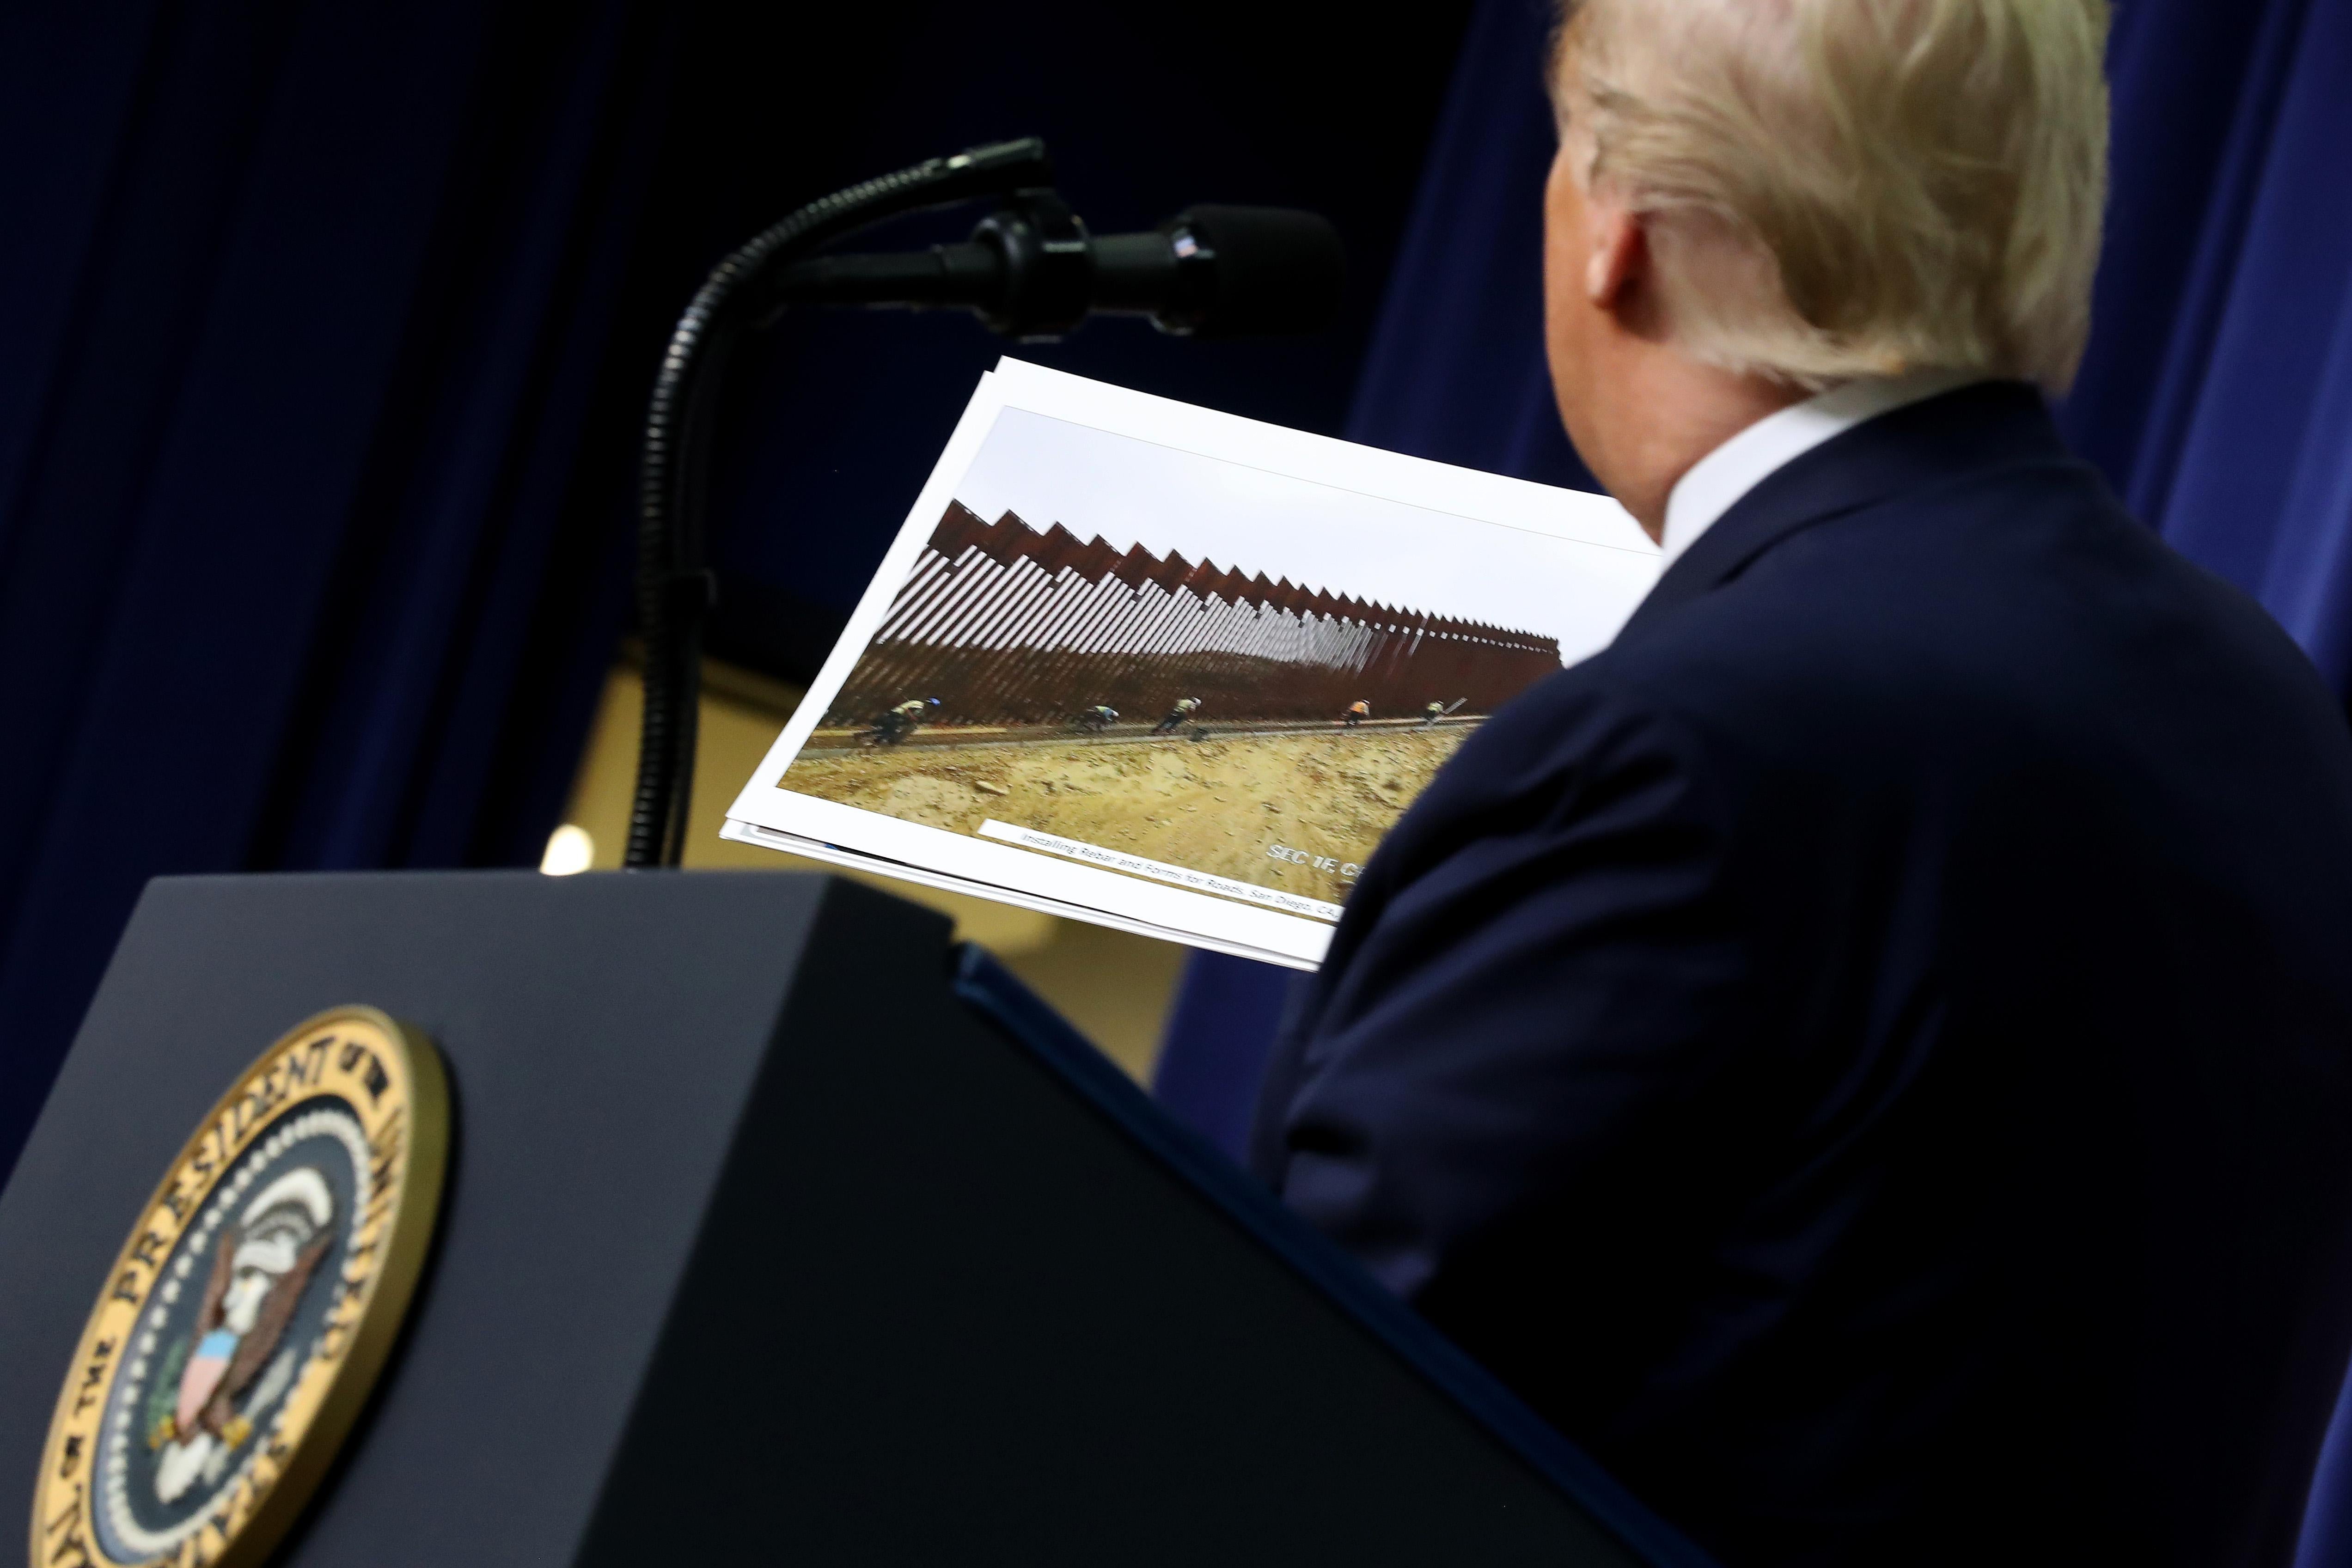 President Trump stands at a podium holding a photograph of border wall construction.